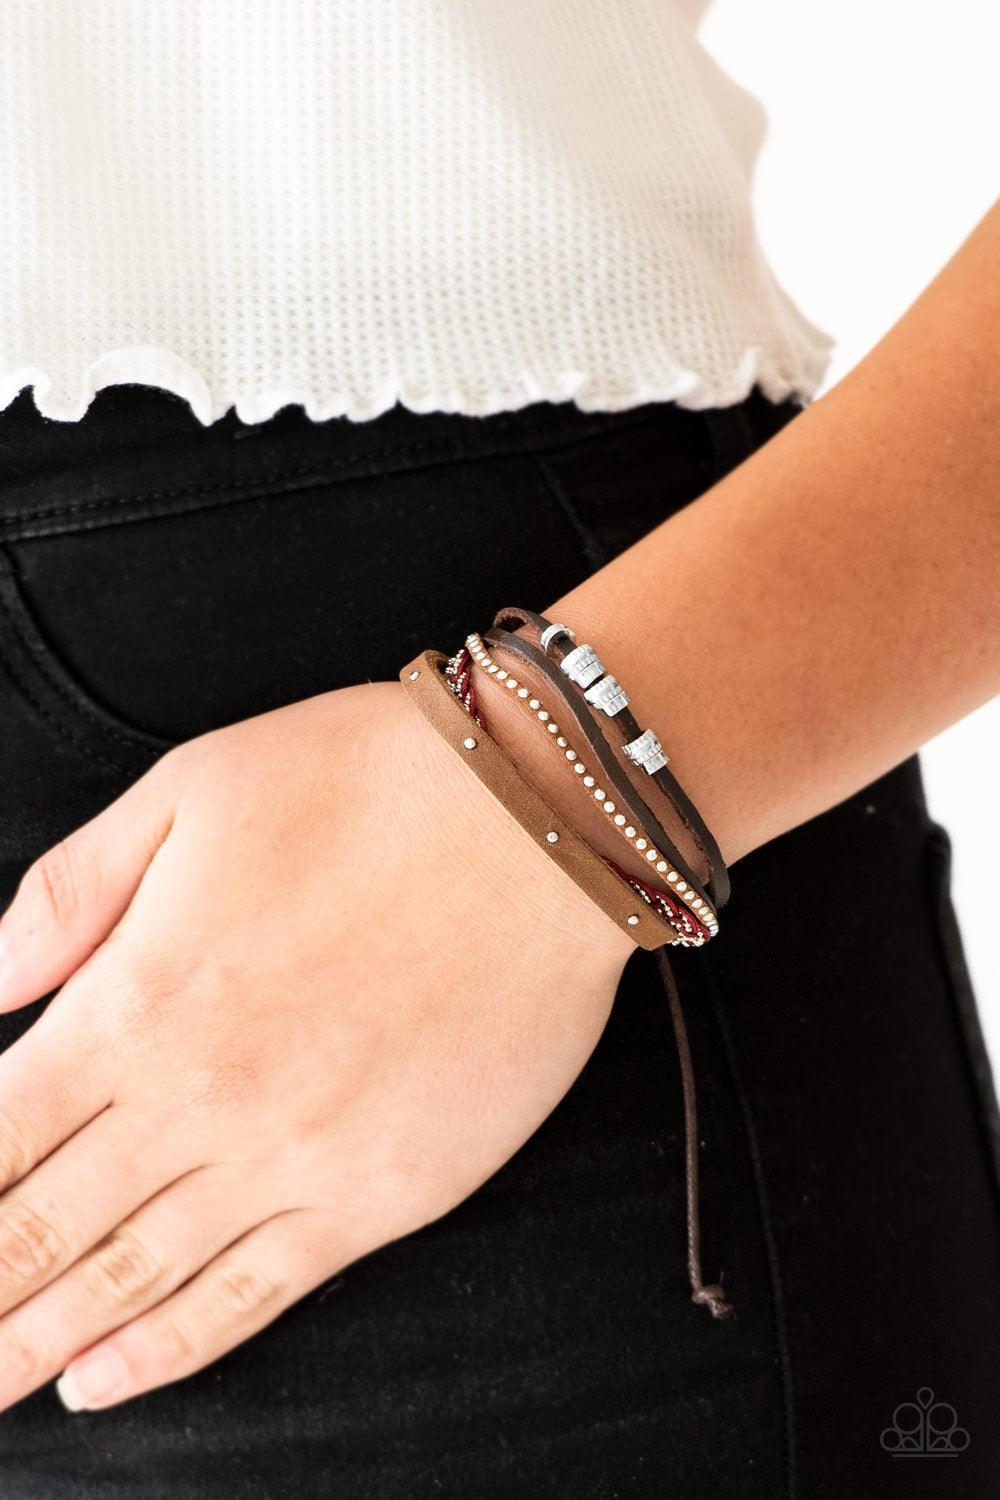 Paparazzi Accessories Day-Trip Trotter - Red Featuring an array of silver accents, mismatched brown leather and suede bands layer across the wrist. Red cording and dainty silver ball chain braid together, adding a refreshing splash of color to the seasona